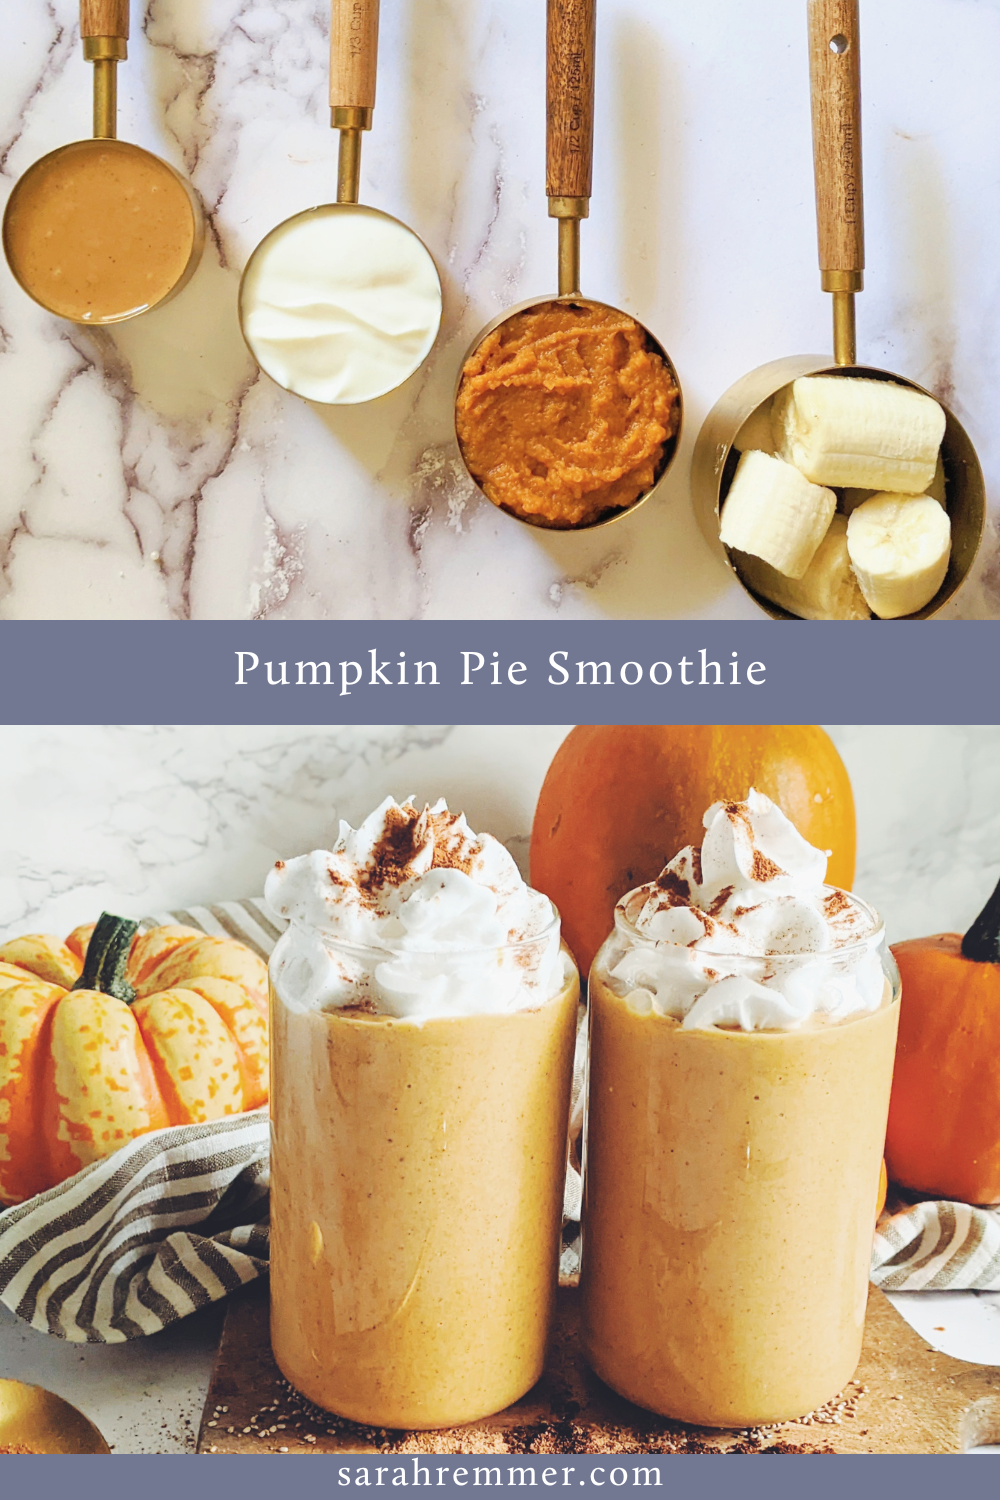 This Pumpkin Pie Smoothie is quick, portable, and scrumptious for all ages. Swap out the nut butter for more yogurt to make it school safe!